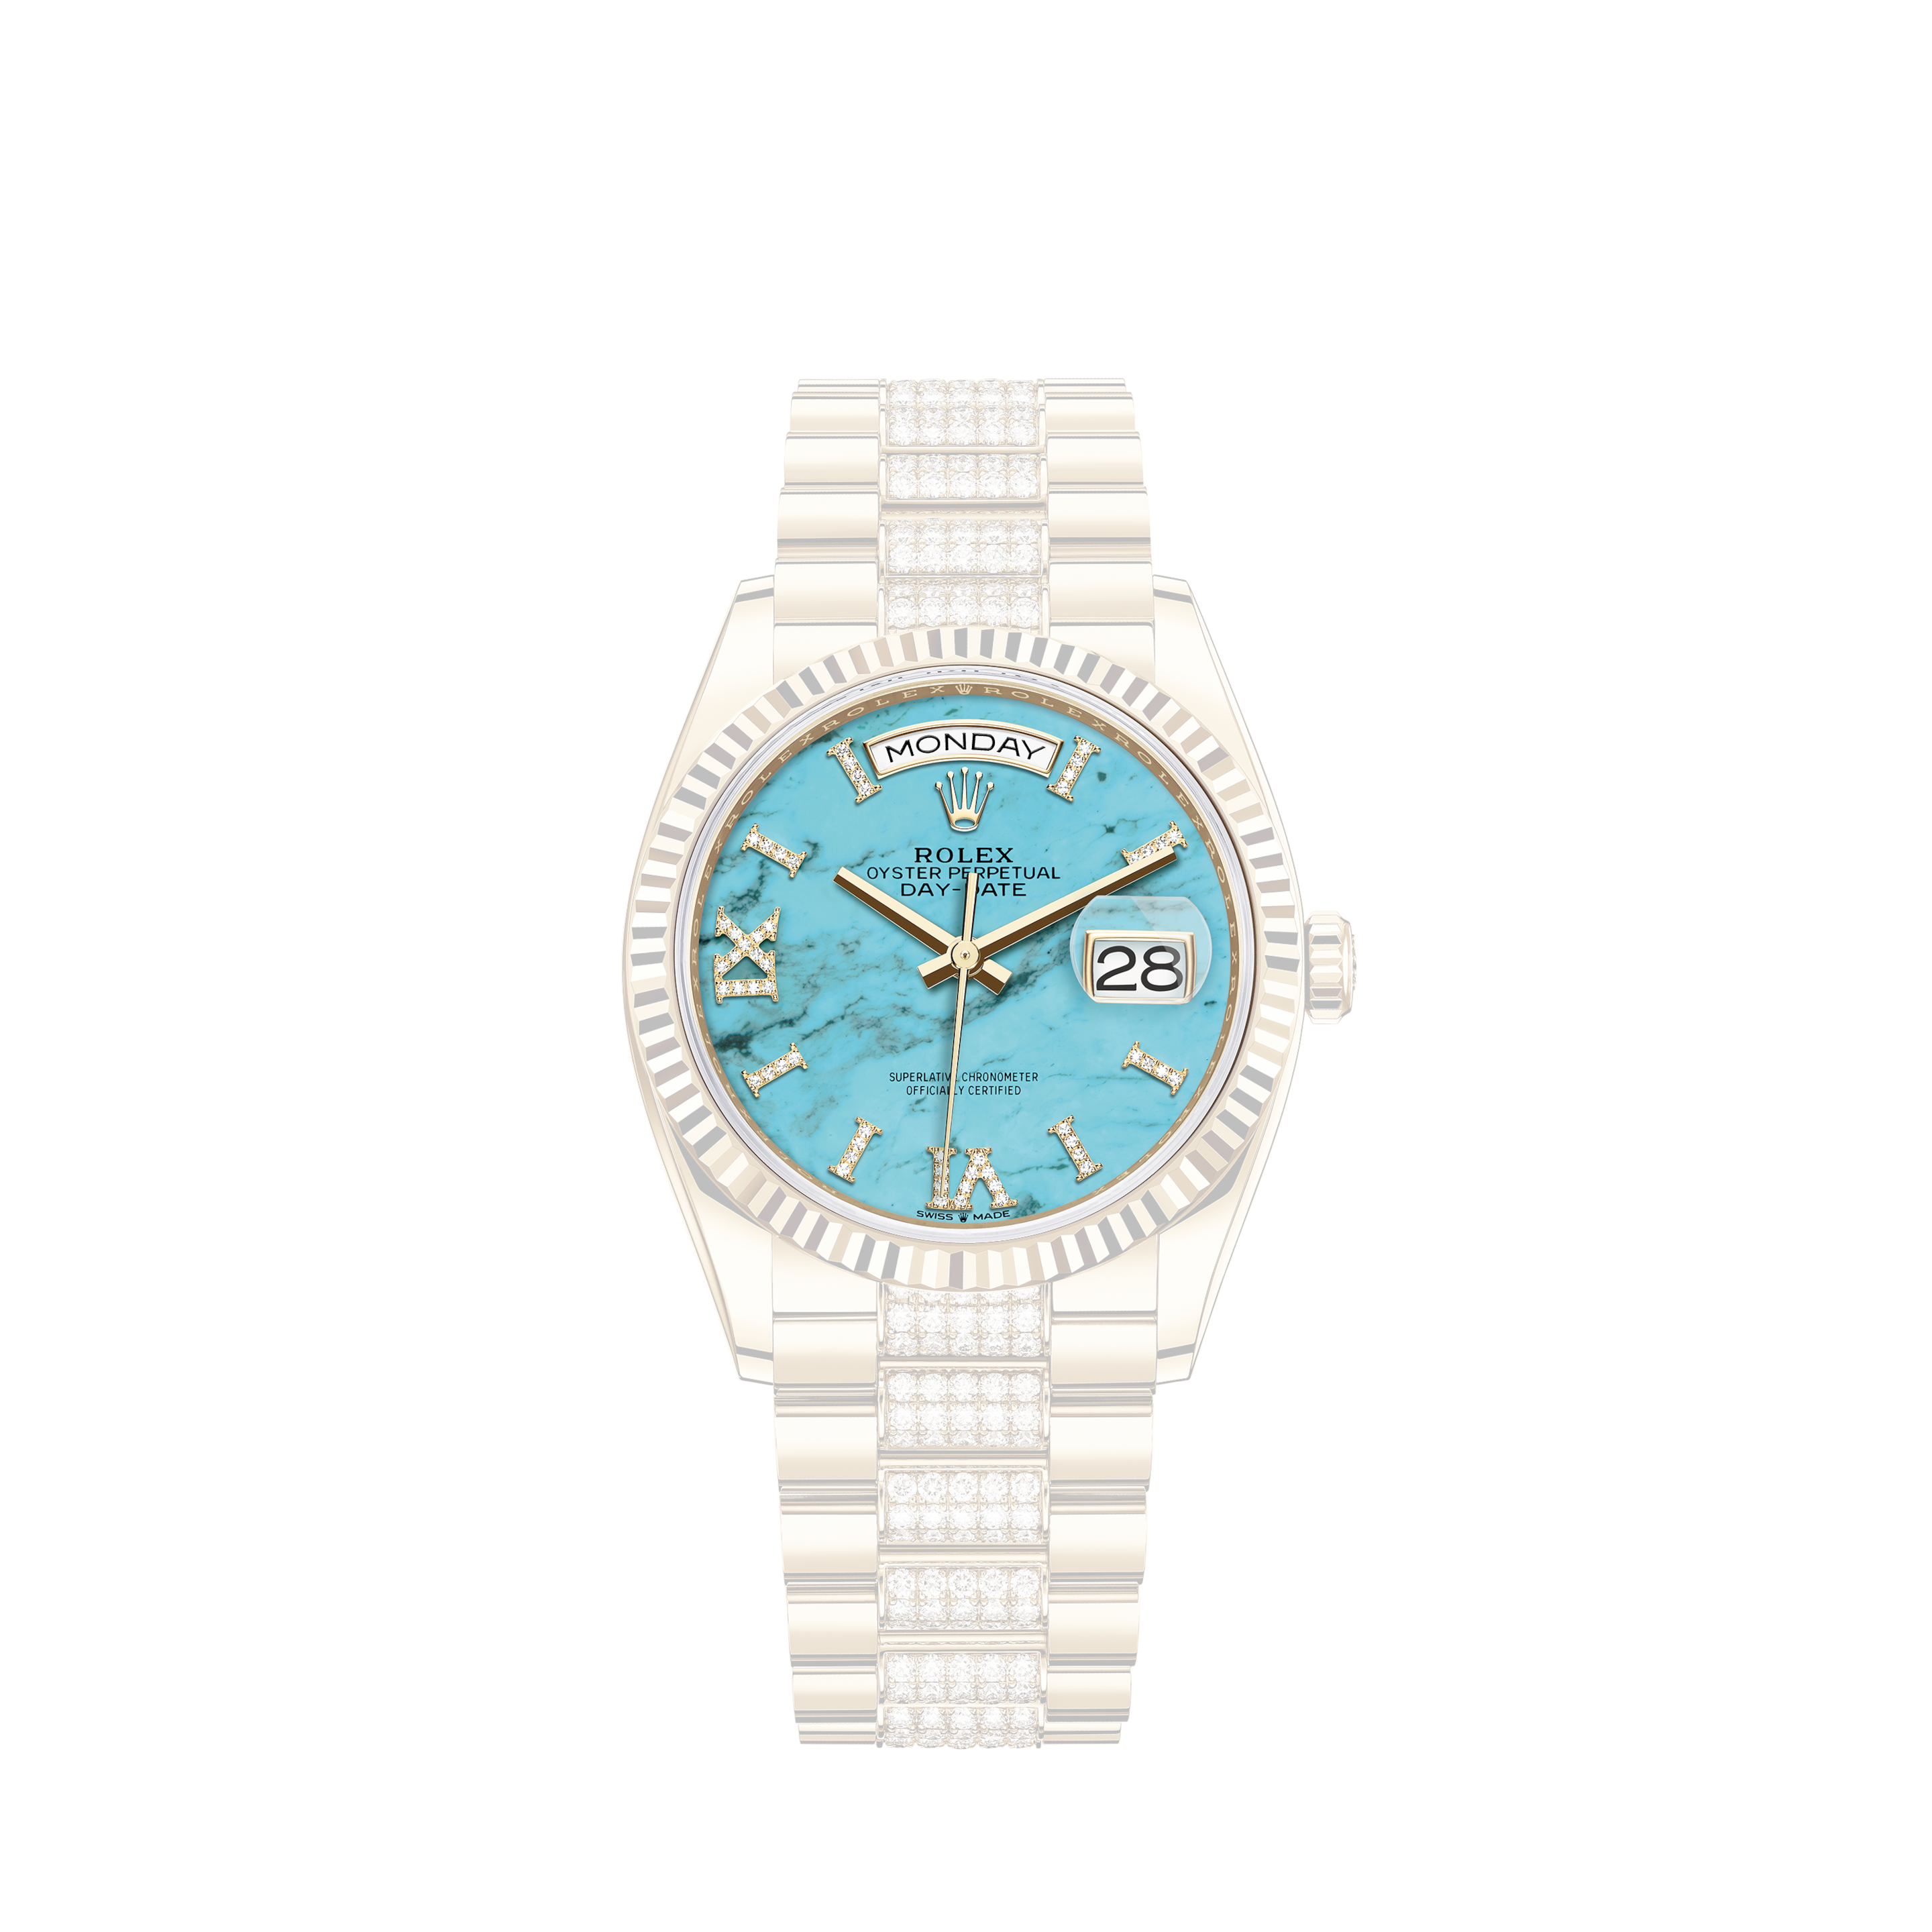 Rolex Ladies Rolex 26mm Datejust Salmon Color Dial with Diamond Accent RTRolex Oysterflex Perpetual Sky dweller 42mm Annual Calendar YG Champagne Index Dial 326238